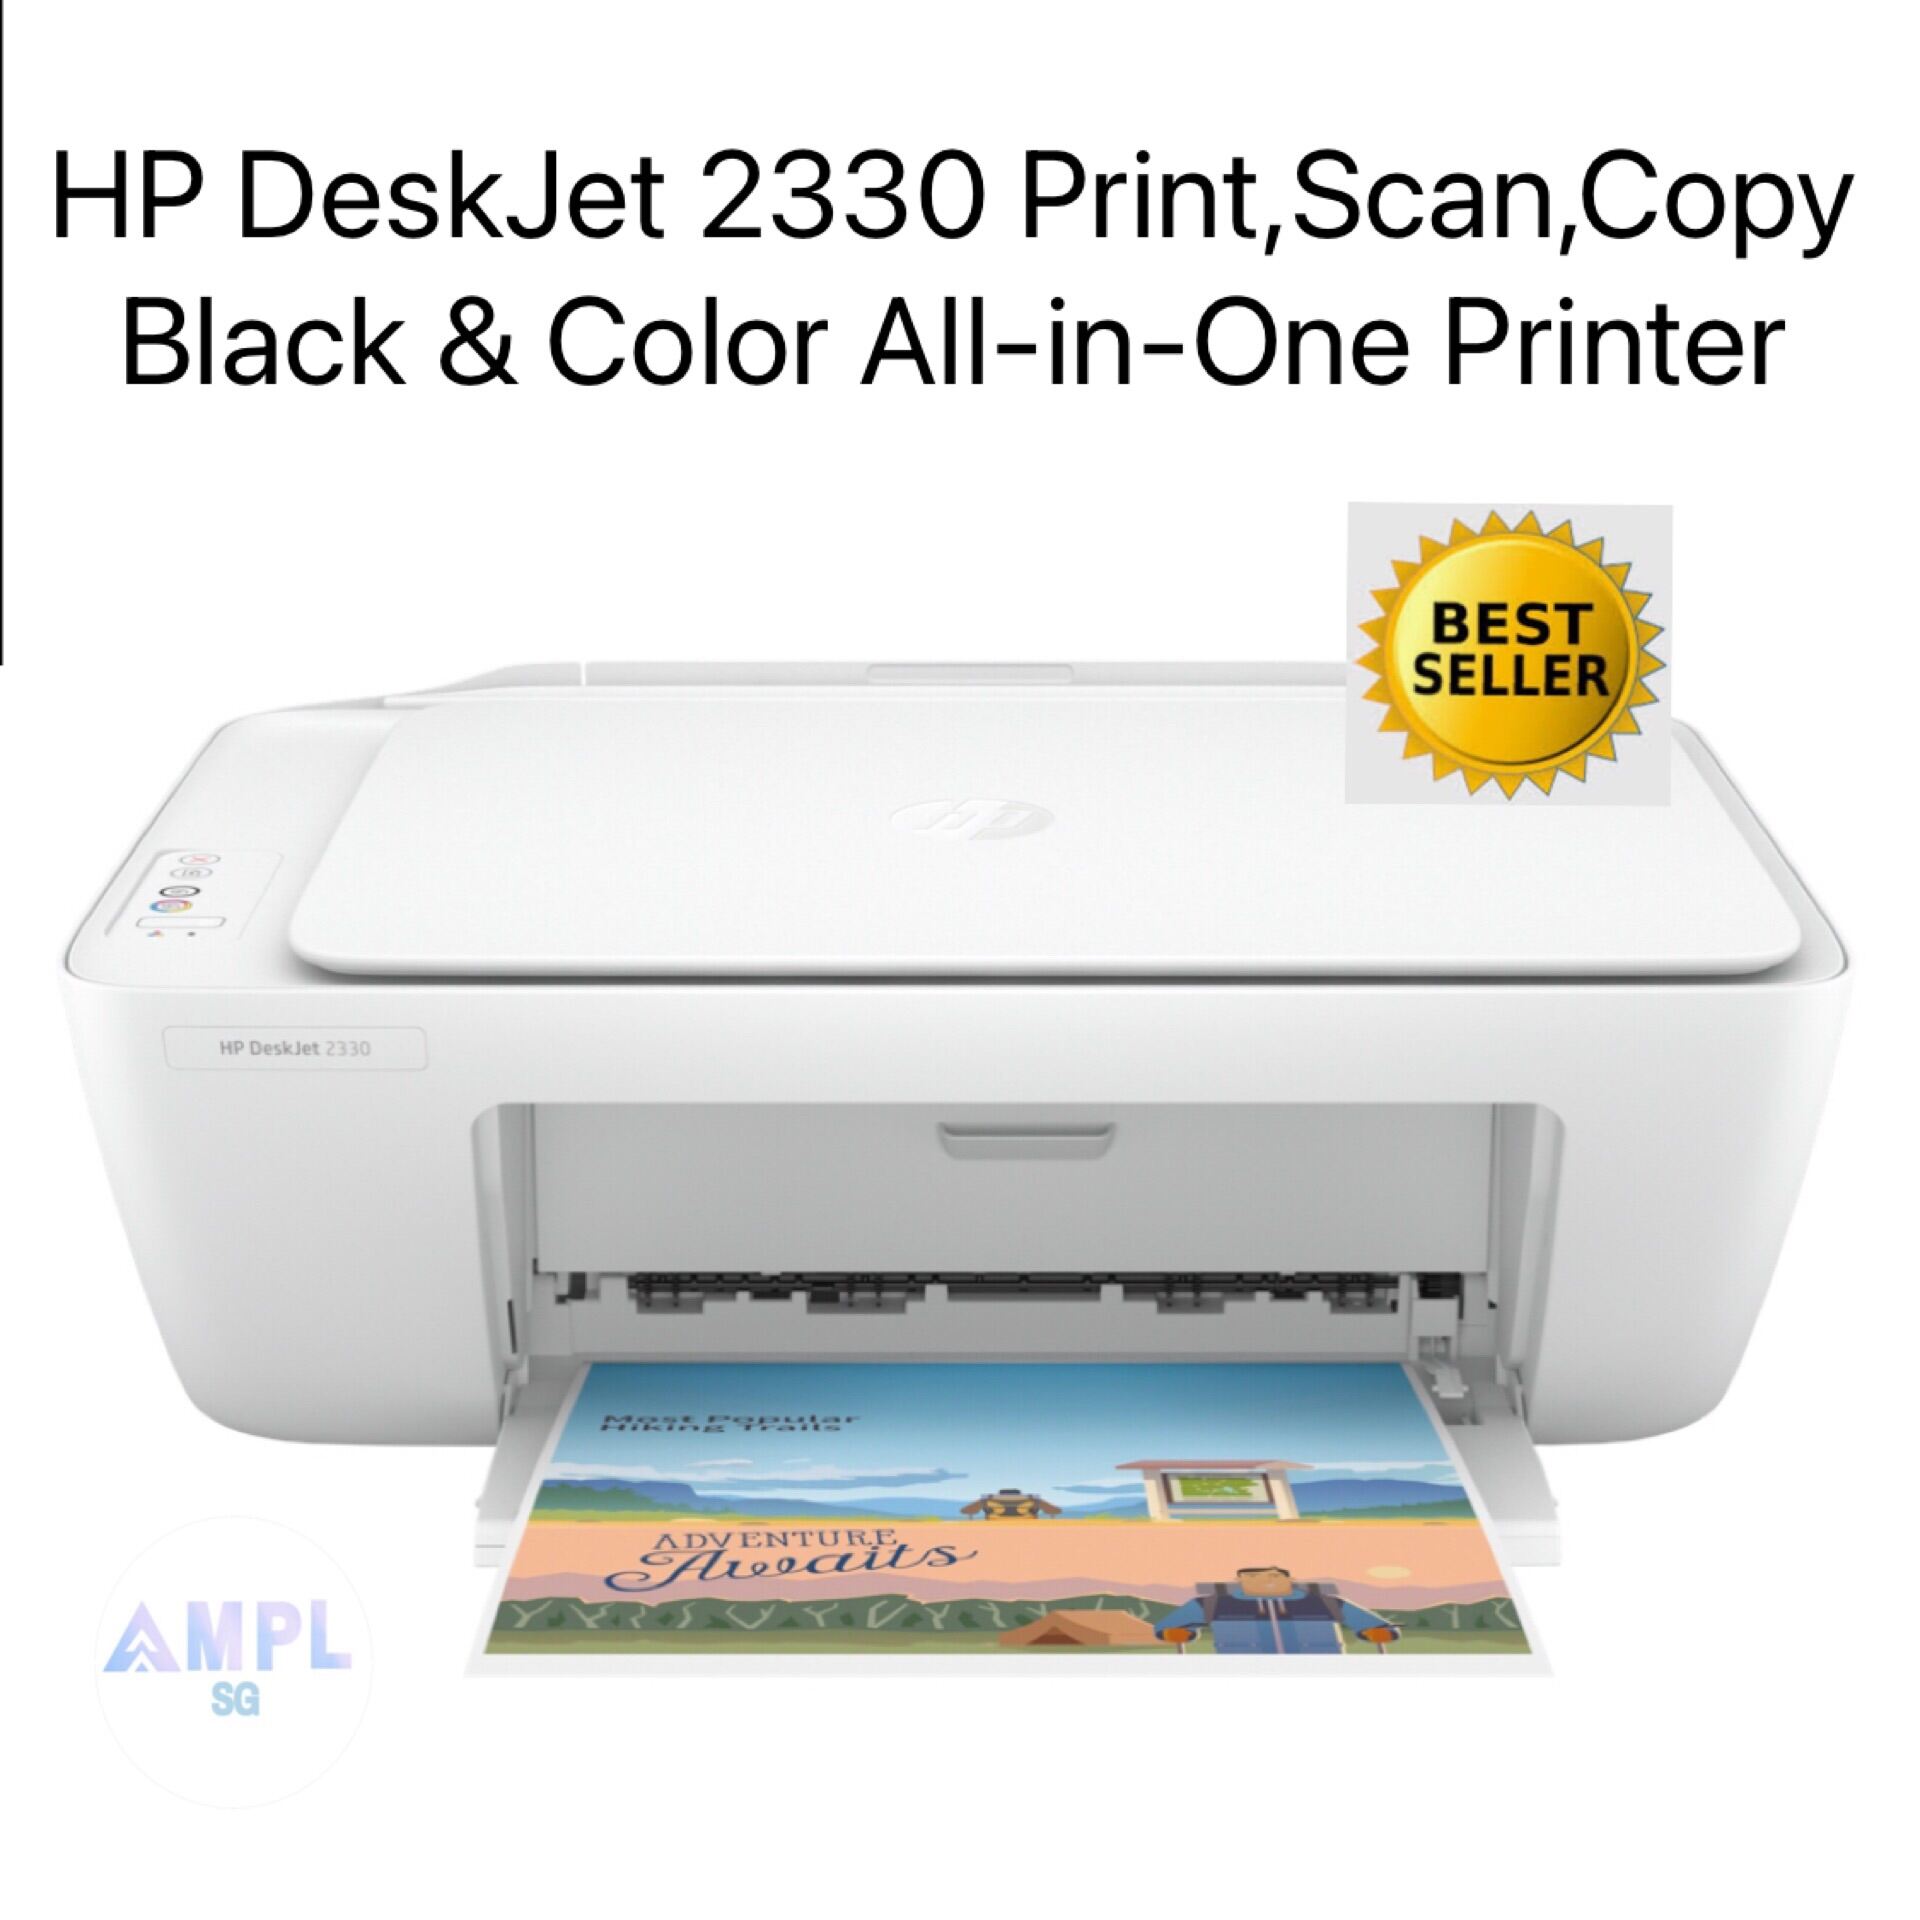 HP 2330 DeskJet Color Printer - Print/Copy/Scan (Orderable ink HP 67,67XL,67XXL) One-year warranty by HP Direct Singapore